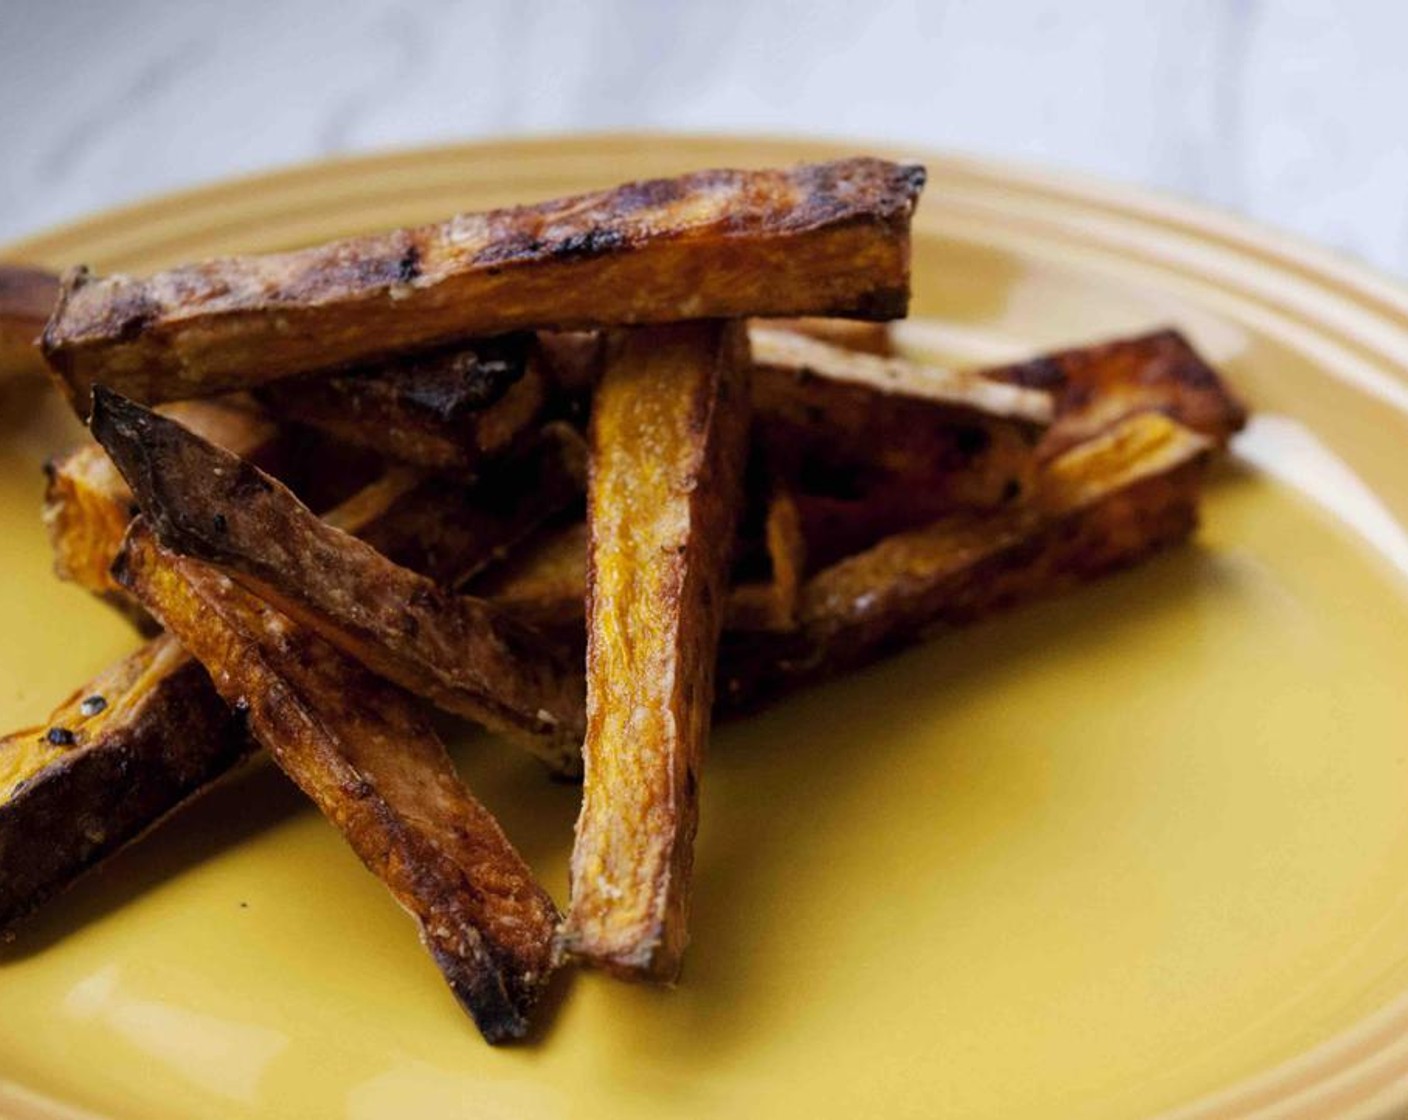 step 5 Toss the pumpkin fries in Extra-Virgin Olive Oil (1 Tbsp) and bake them in the preheated oven for about 20-25 minutes until nice and crispy.